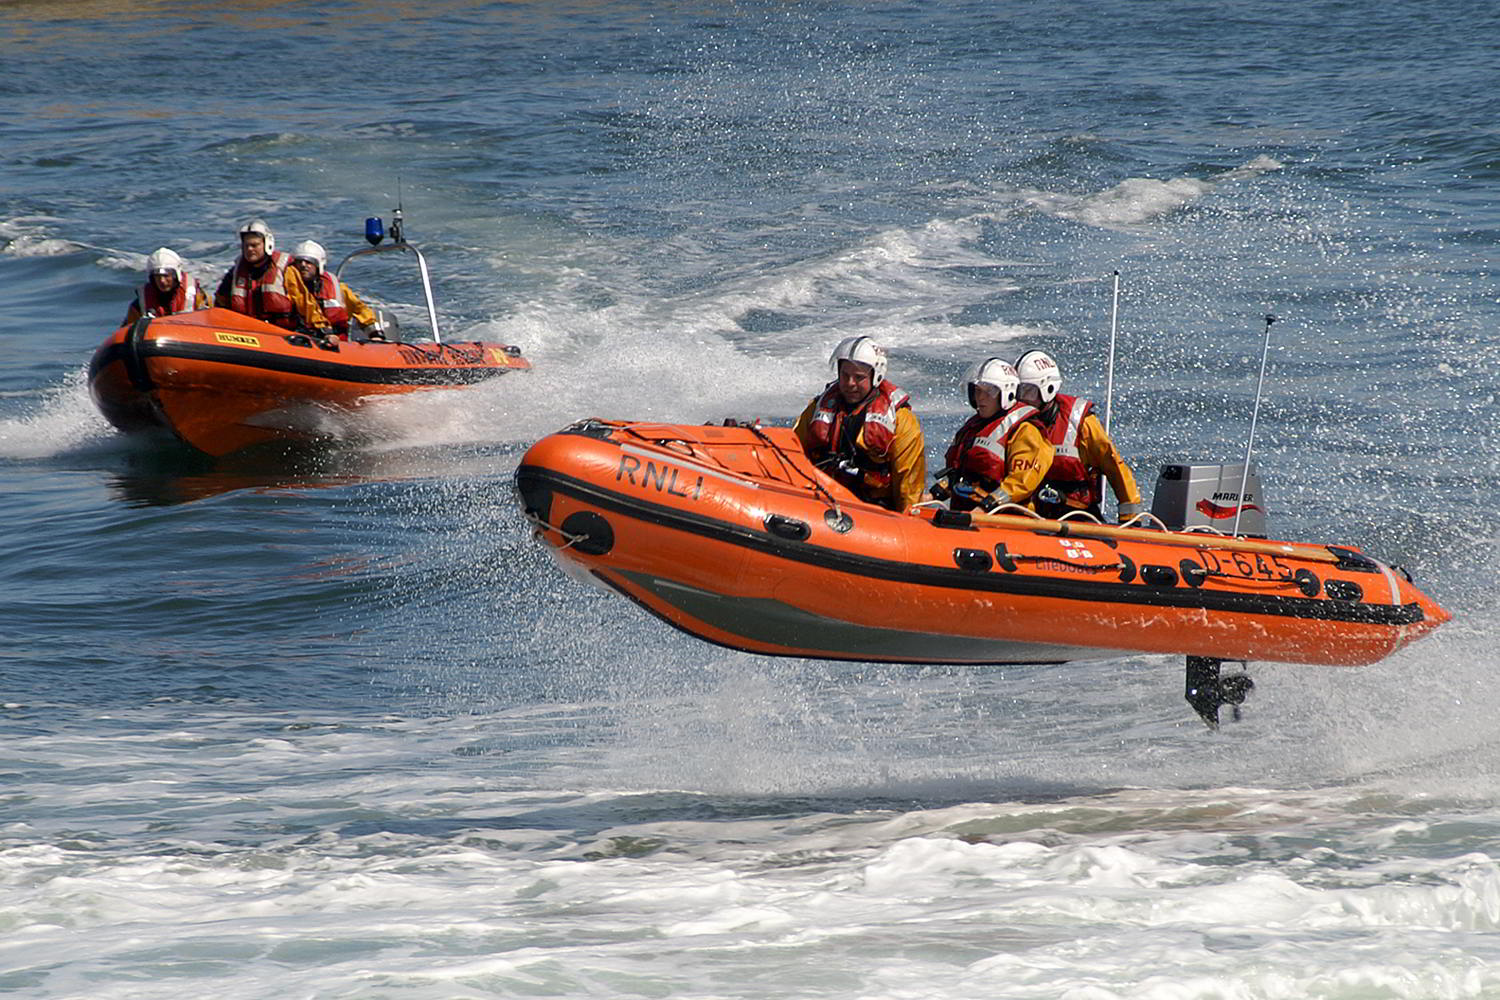 Inshore Lifeboat , HD Wallpaper & Backgrounds